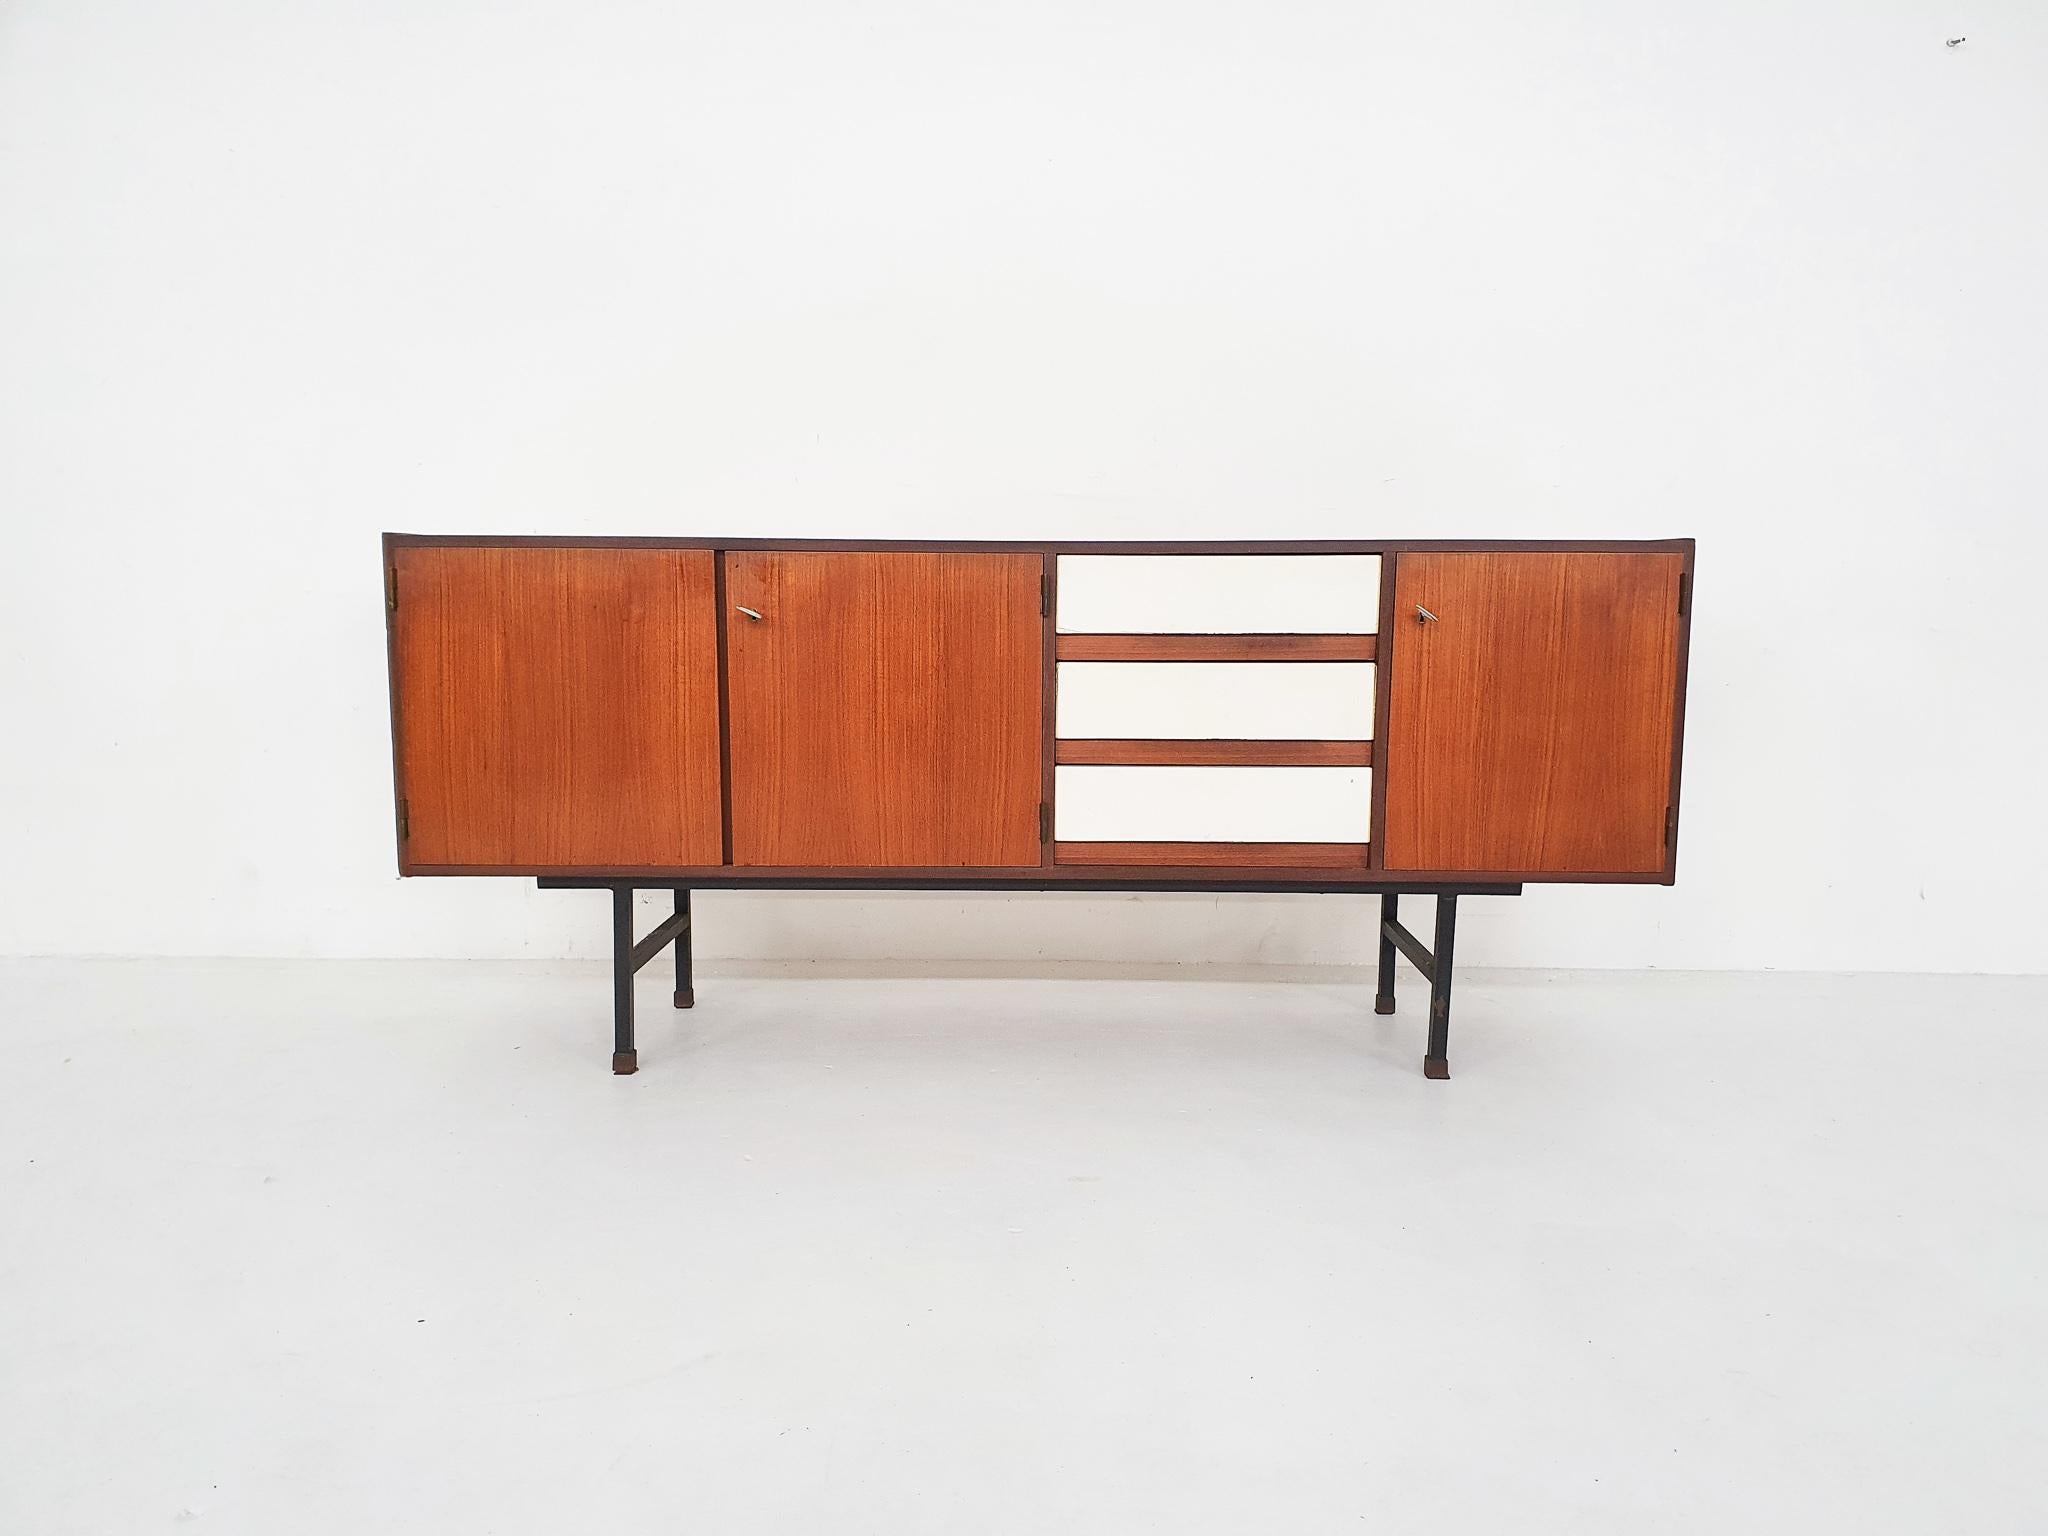 Teak veneer desk with 2 doors and three white Formica drawers.

On black metal legs with wooden feet

In good condition with some traces of use. Top has been sand and varnished.